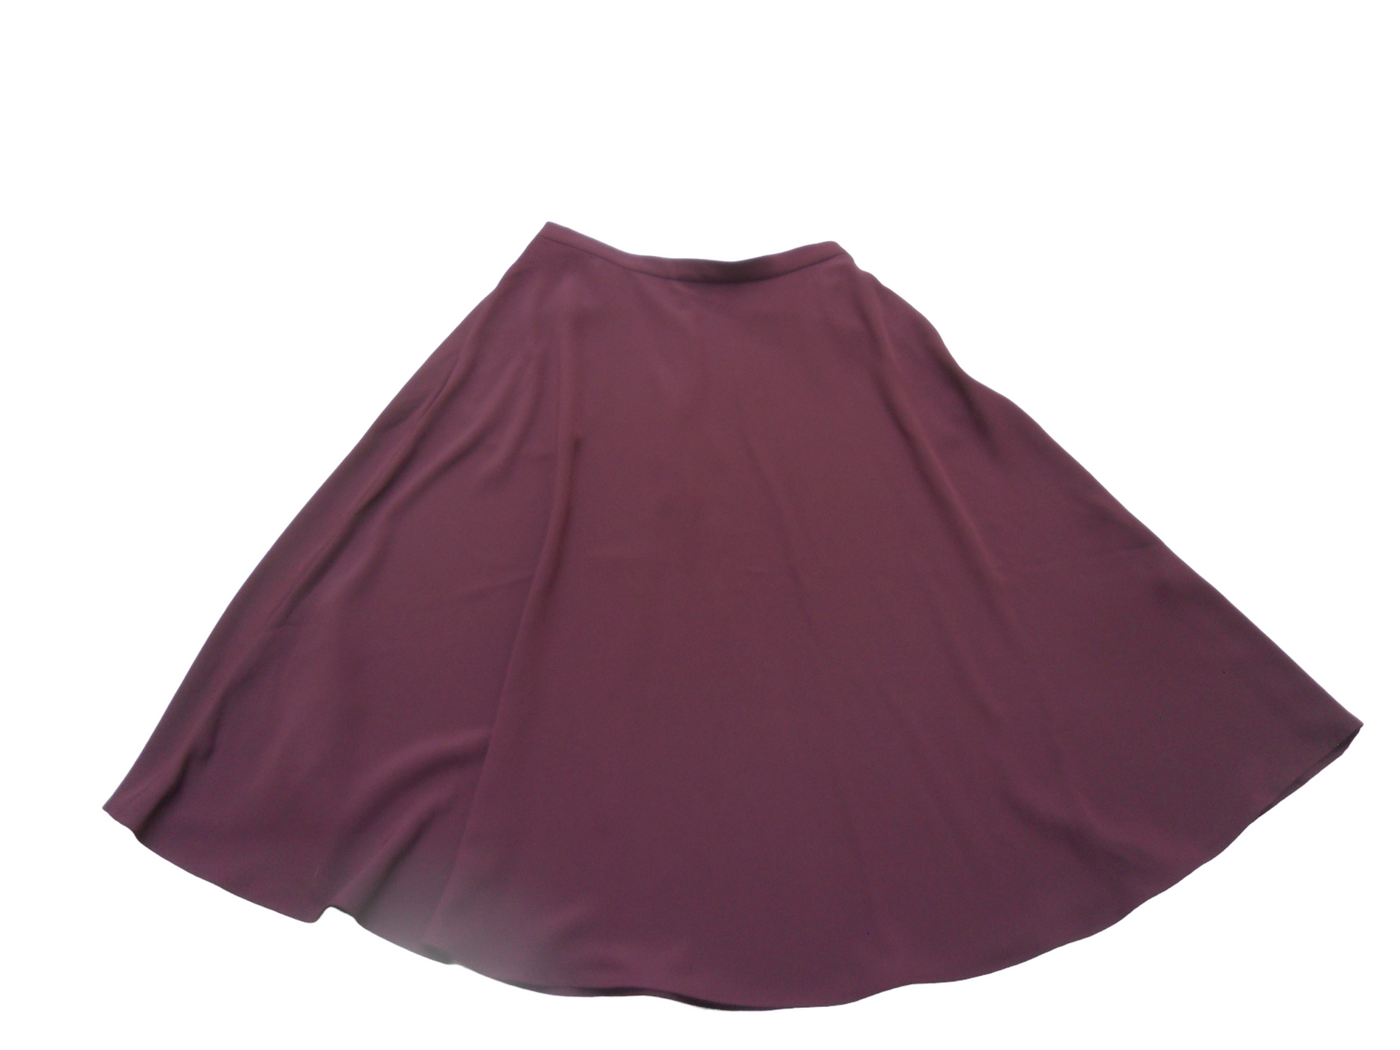 Vintage UNIQLO Maroon, Polyester, Ladies Middy Skirt Size-M